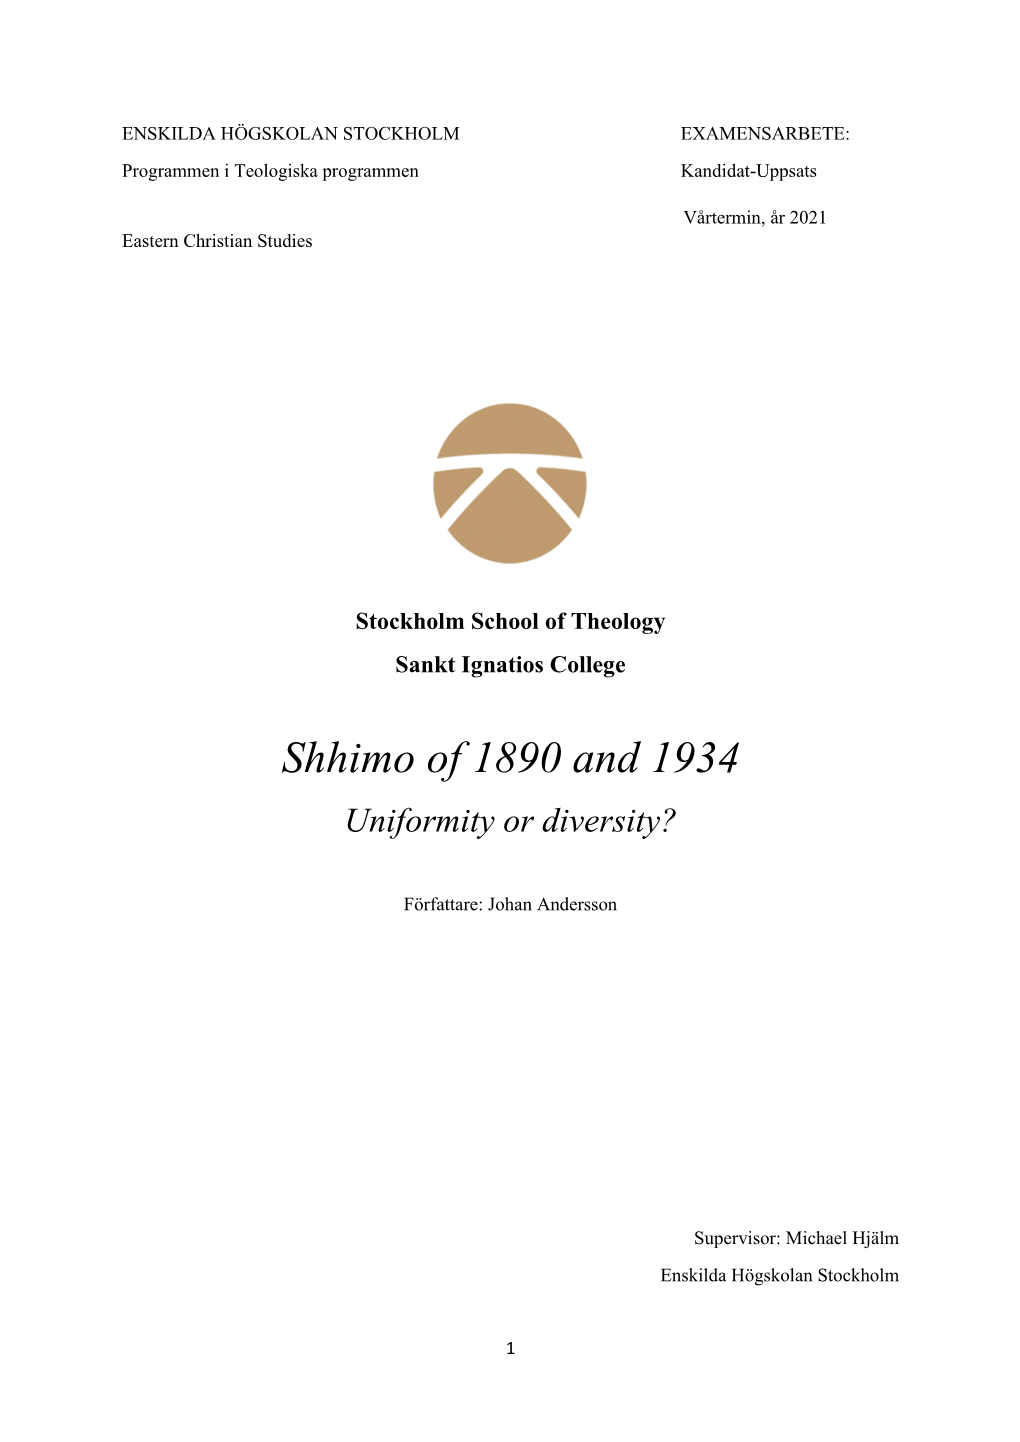 Shhimo of 1890 and 1934 Uniformity Or Diversity?